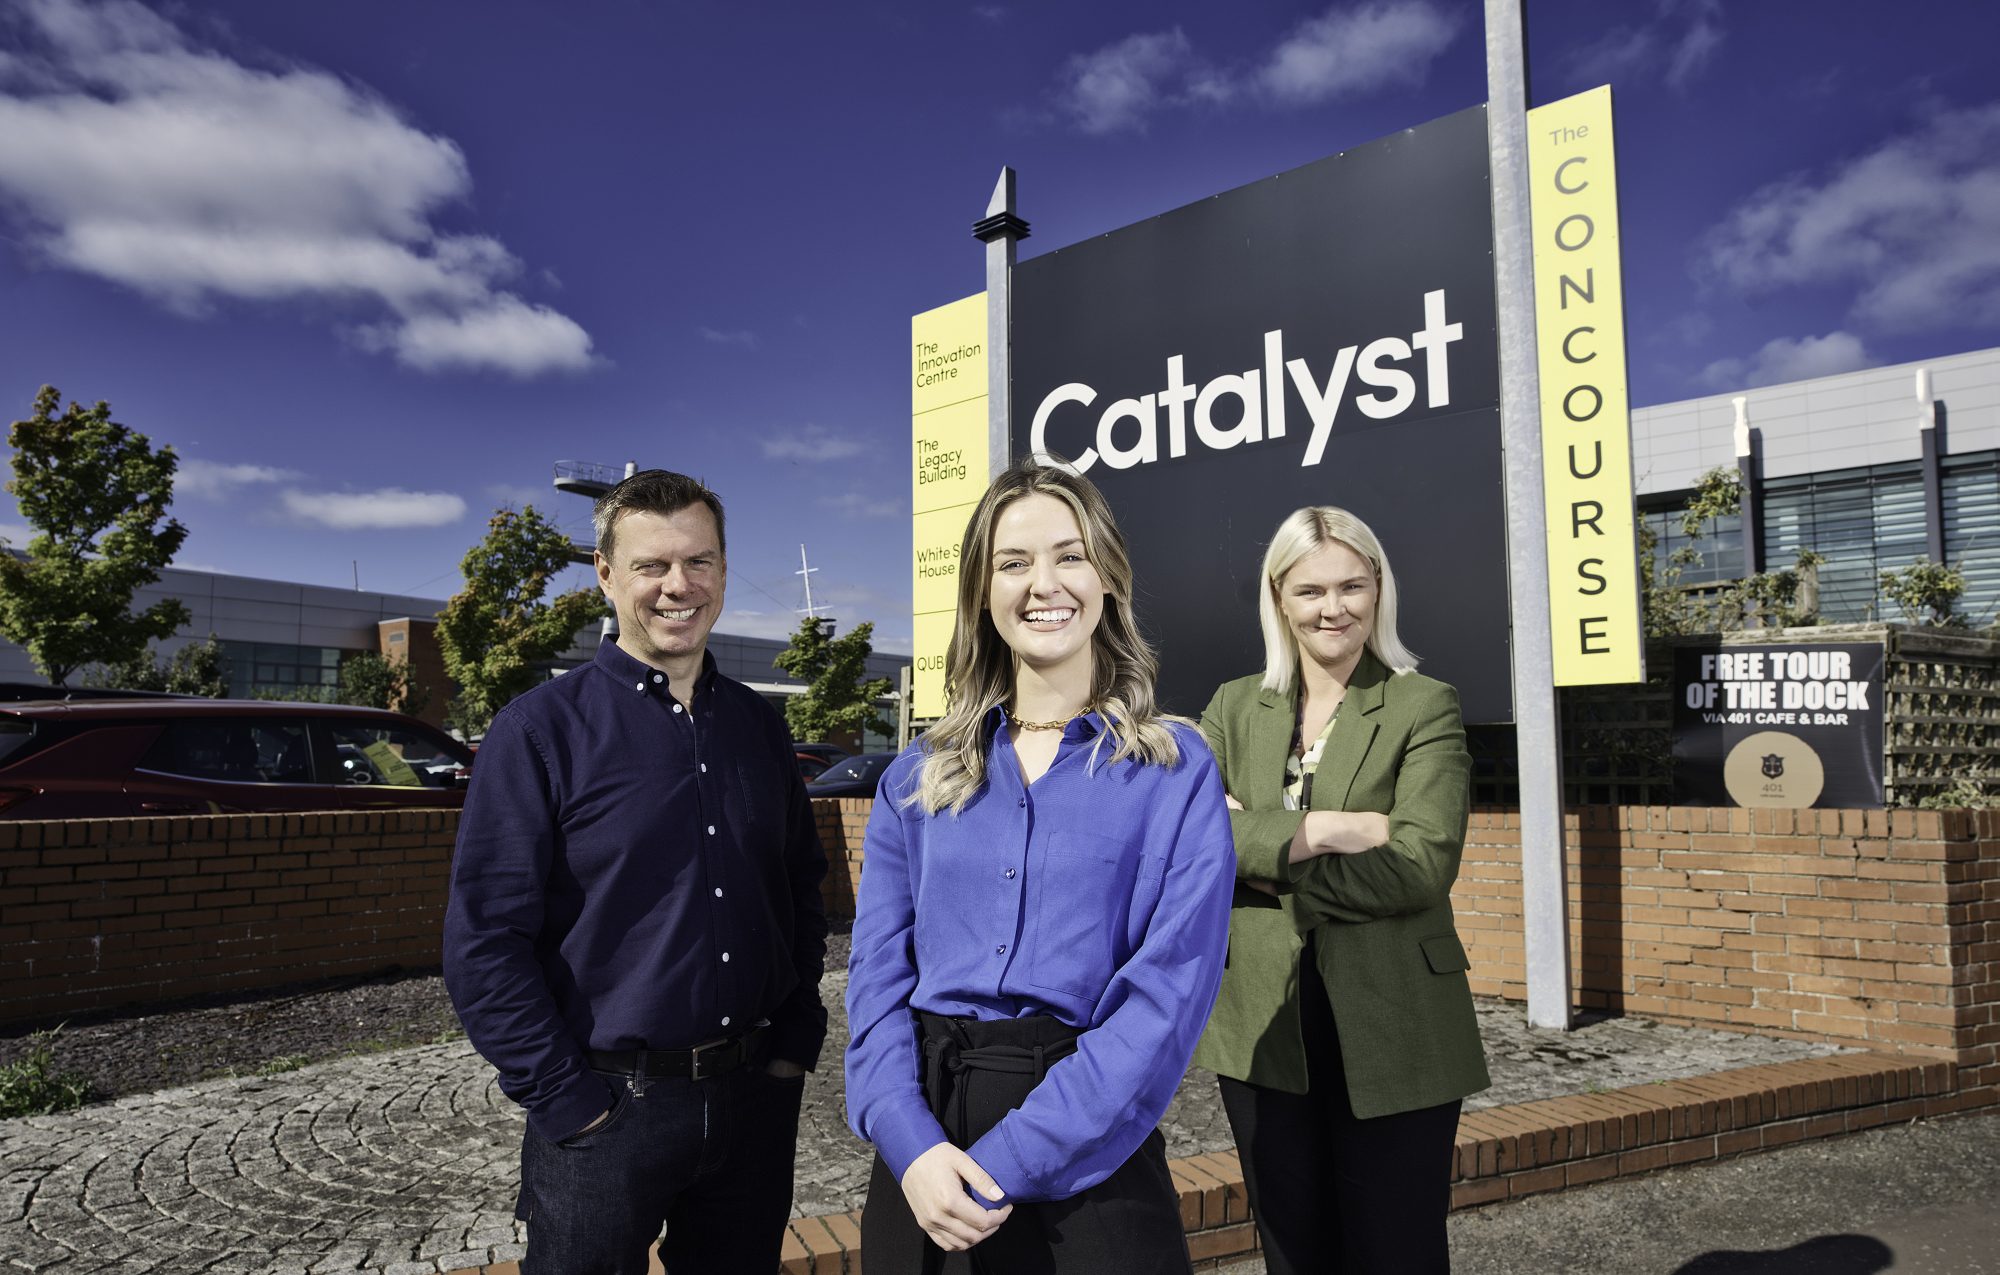 Championing Inclusion in Innovation, Catalyst is Awarded a Silver Diversity Mark